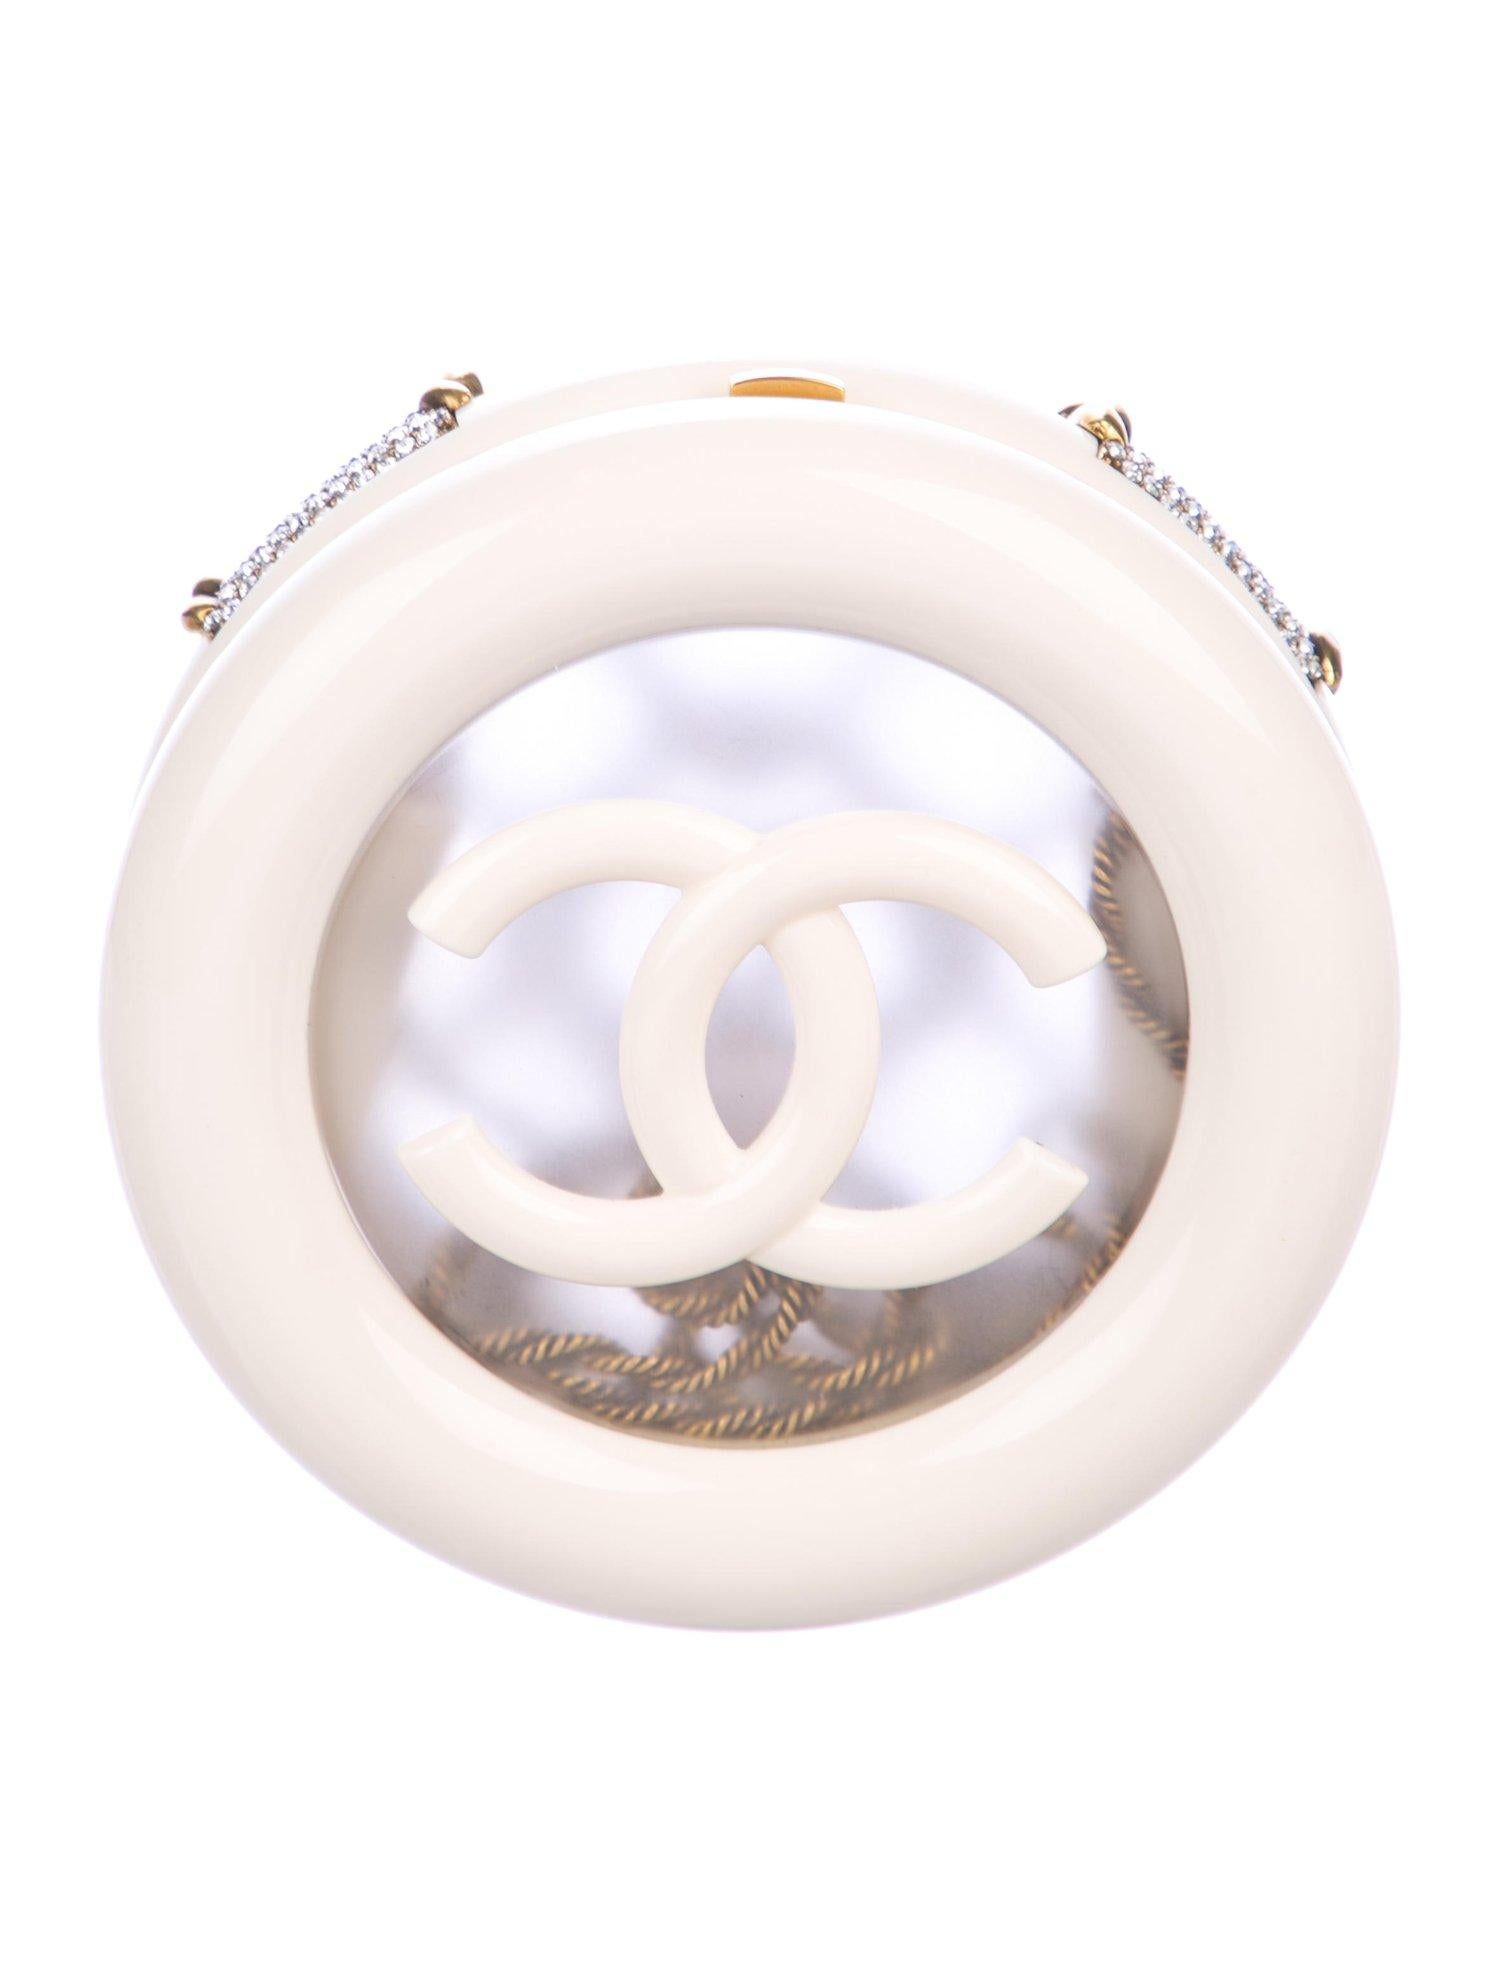 Chanel NEW Limited Edition Ivory Crystal Round CC Mini 2 in 1 Clutch Evening Shoulder Bag in Box

Resin
Crystal
Leather
Metal
Gold tone hardware
Acrylic and leather interior 
Push lock closure 
Date code present
Made in France
Shoulder strap drop